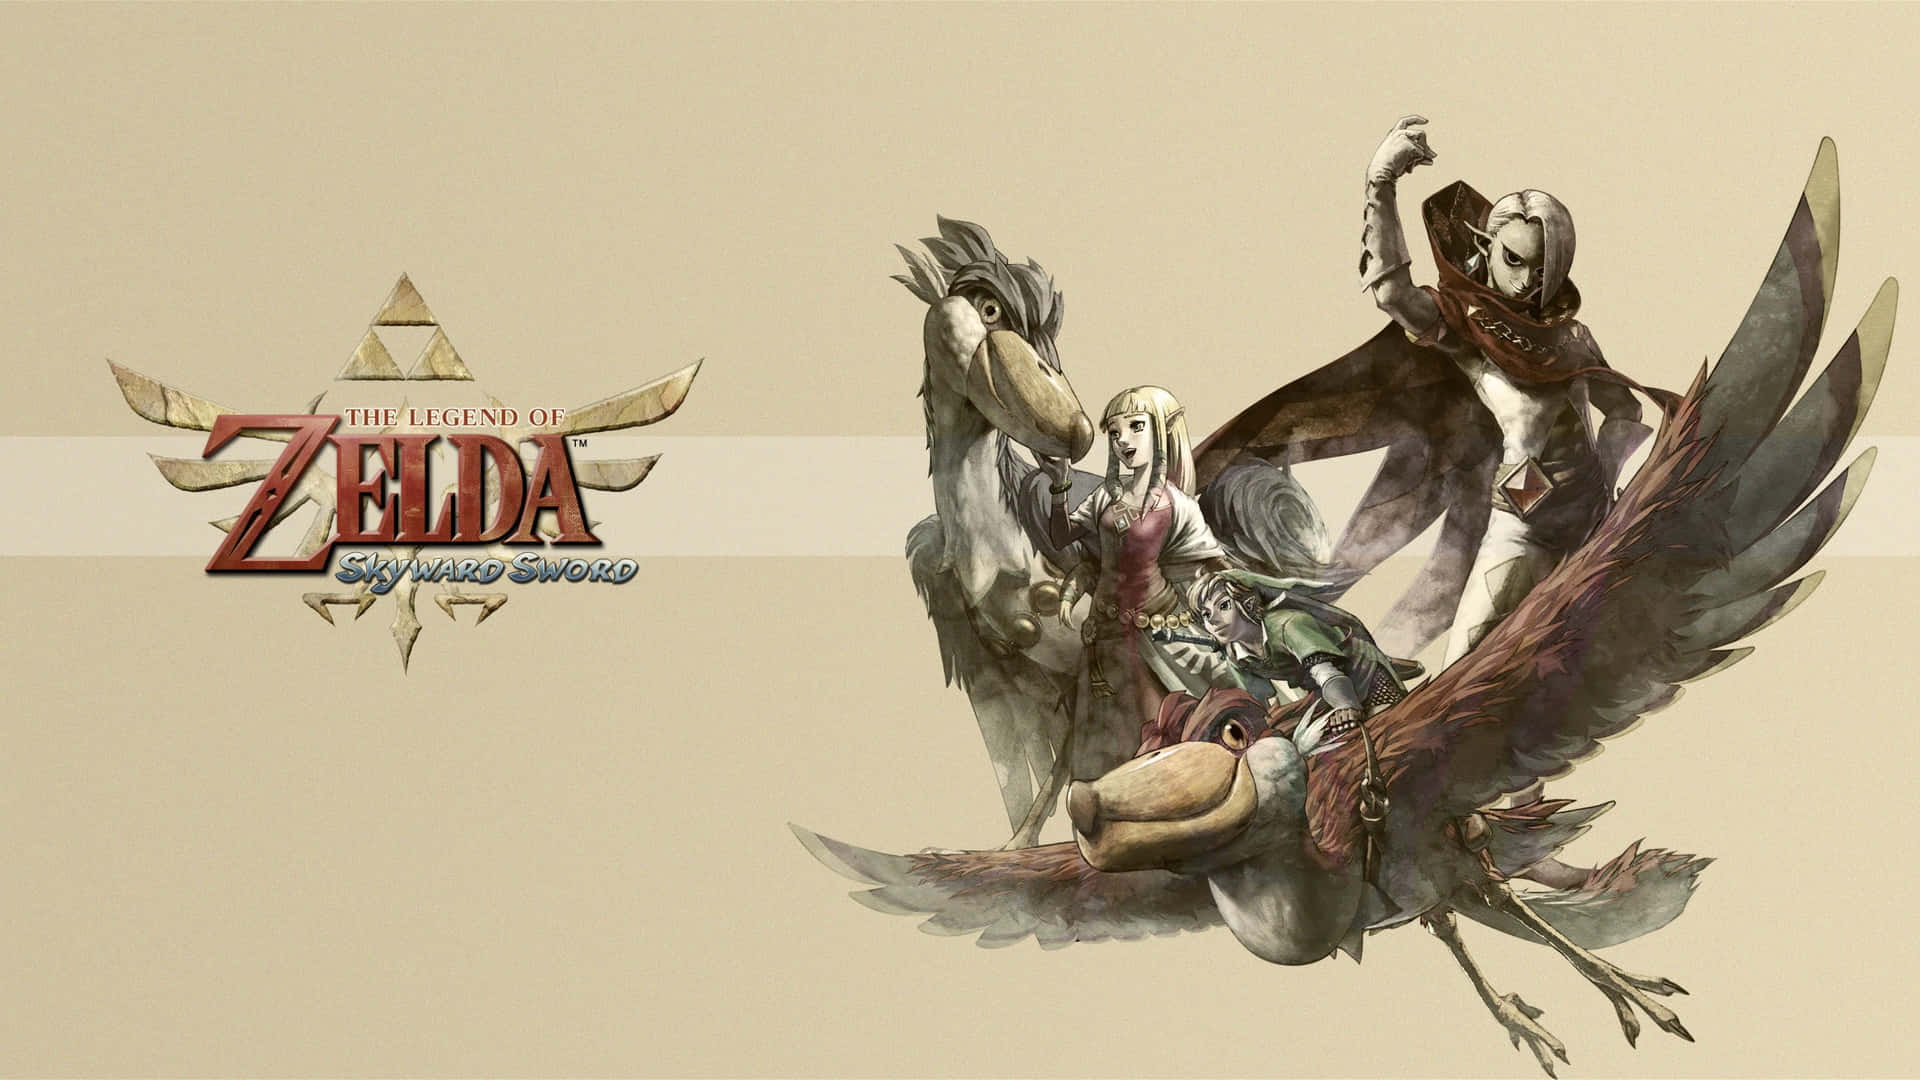 Link fights for his noble cause in Skyward Sword Wallpaper